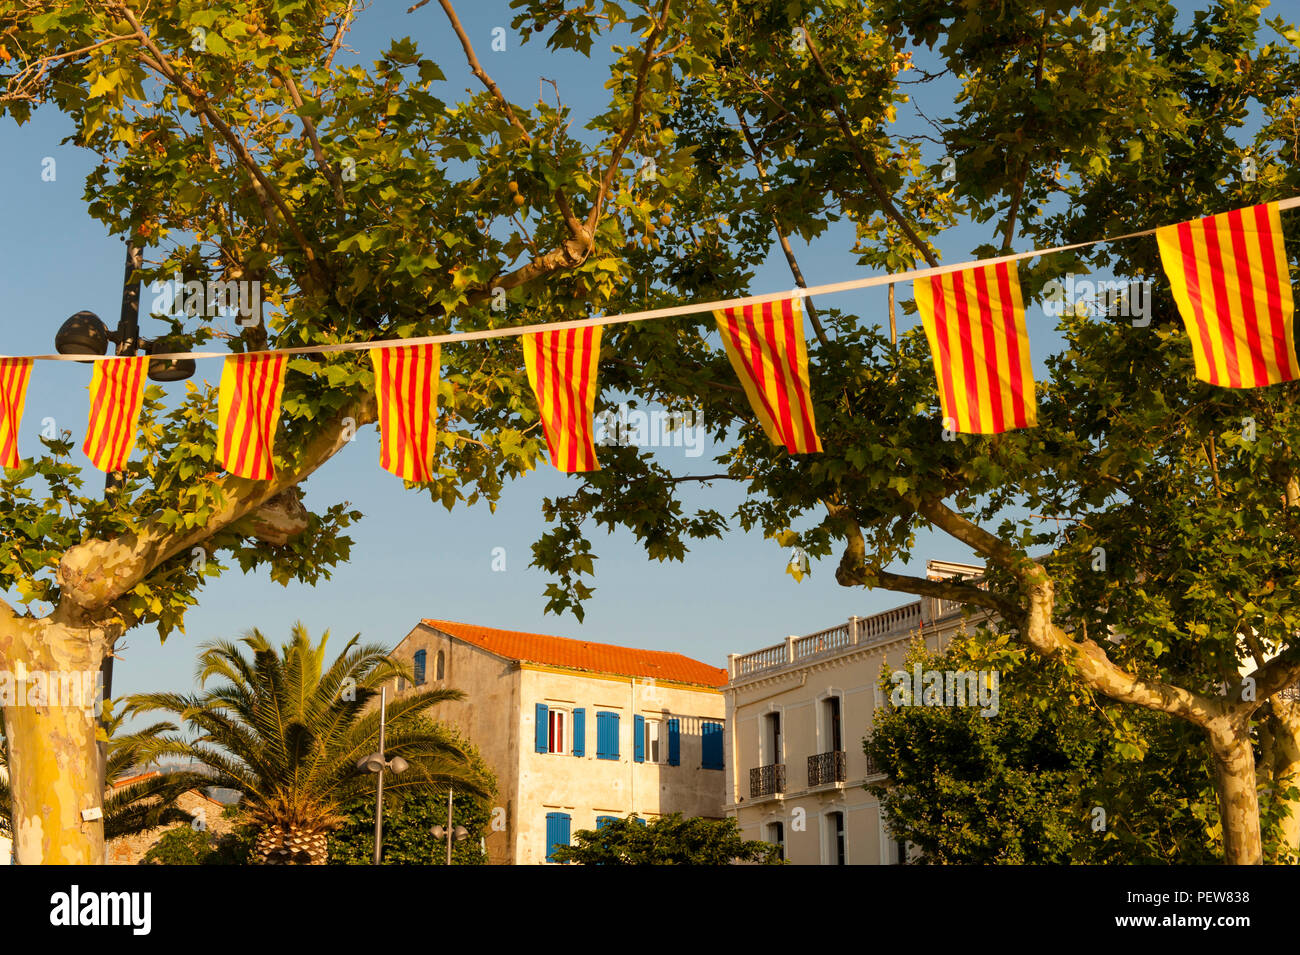 Catalan flags waving in the wind on the beachfront promenade at Banyuls, southern France Stock Photo